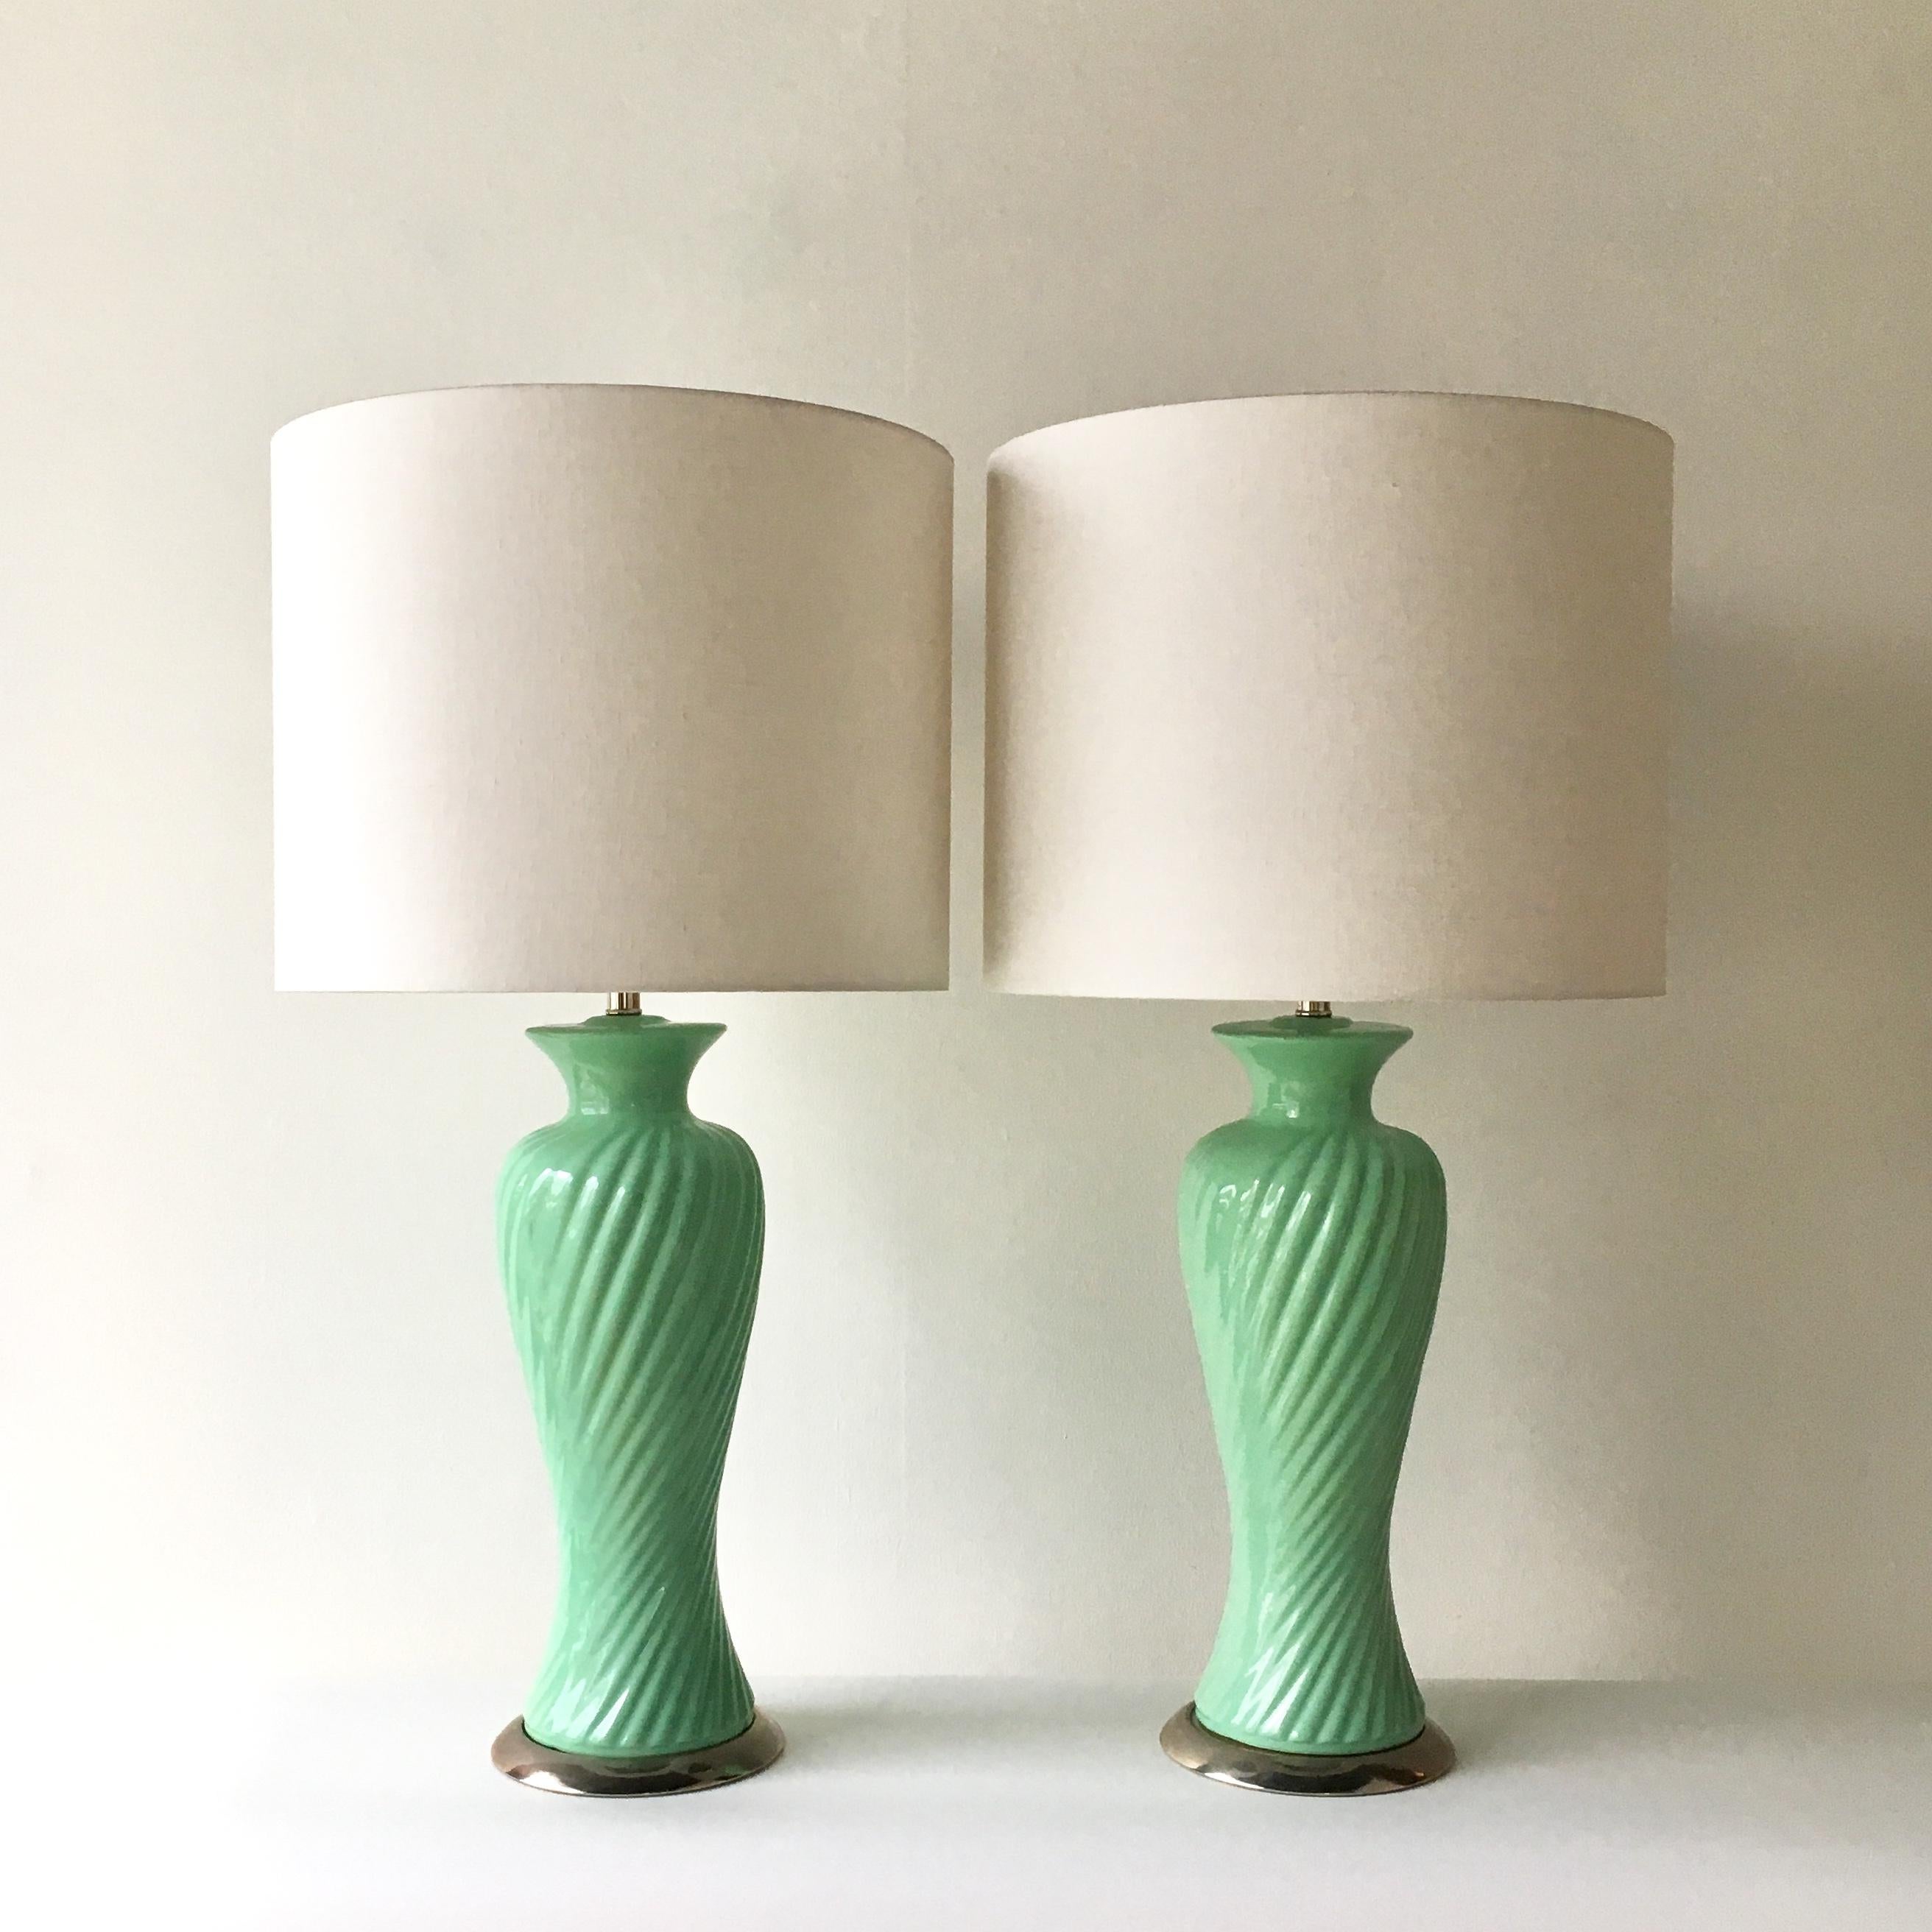 A pair of aqua green ribbed glazed ceramic table lamps on nickel plated mounts 1960s
Fully refurbished and rewired by Talisman.  
Custom made lamp shades shown in photo included in price.